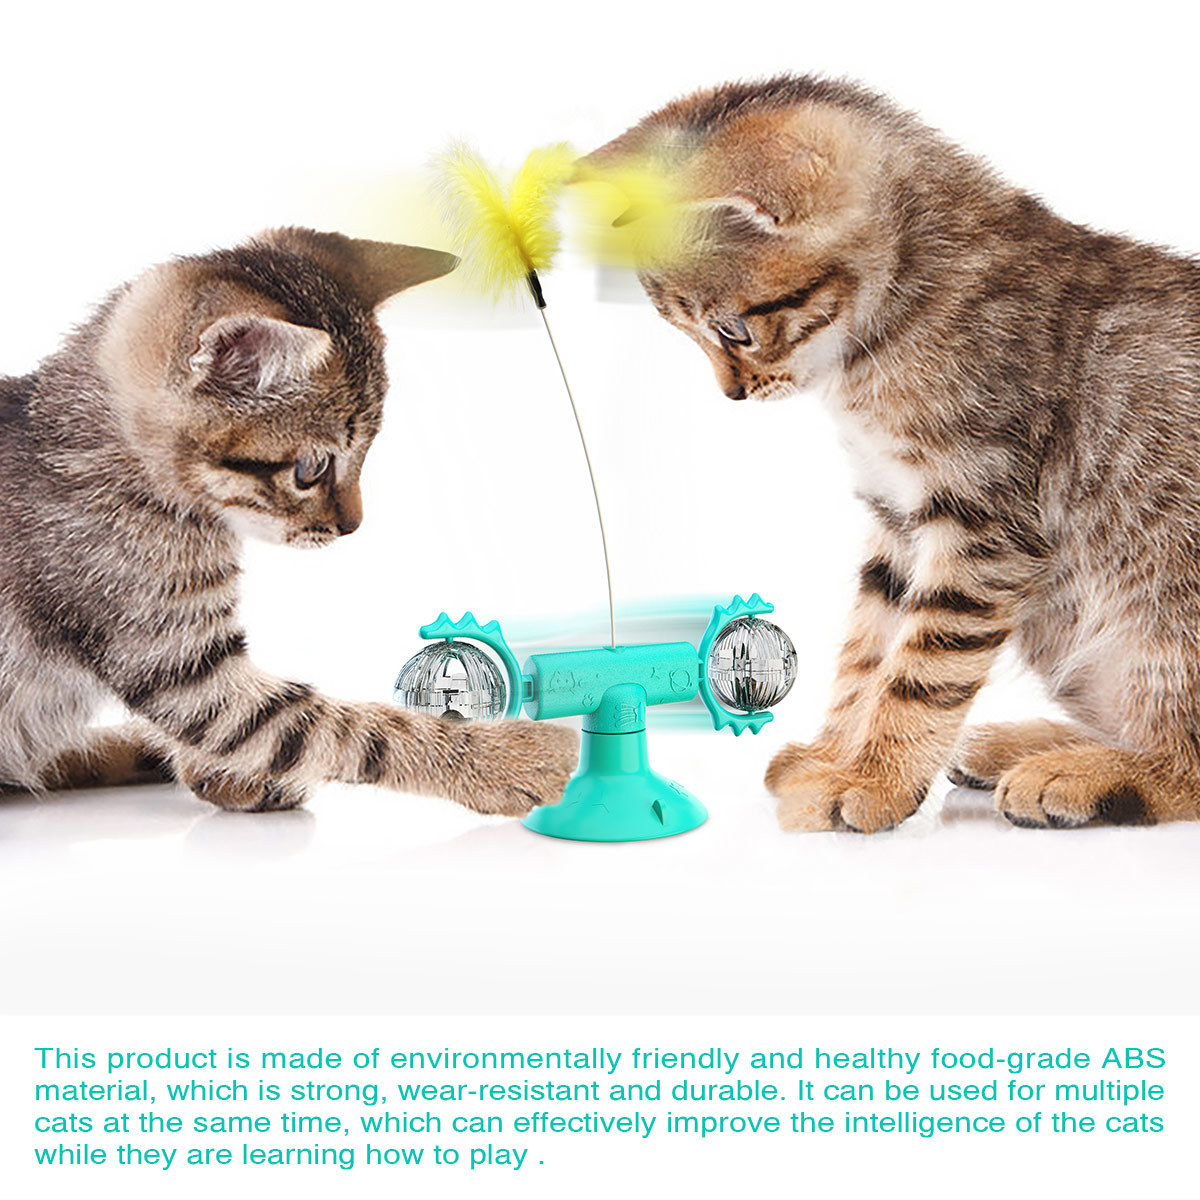 Swing-Toys-for-Cats-Interactive-Portable-Scratch-Hair-Brush-Cat-Toy-With-Catnip-Funny-Pet-Products-f-1798510-6